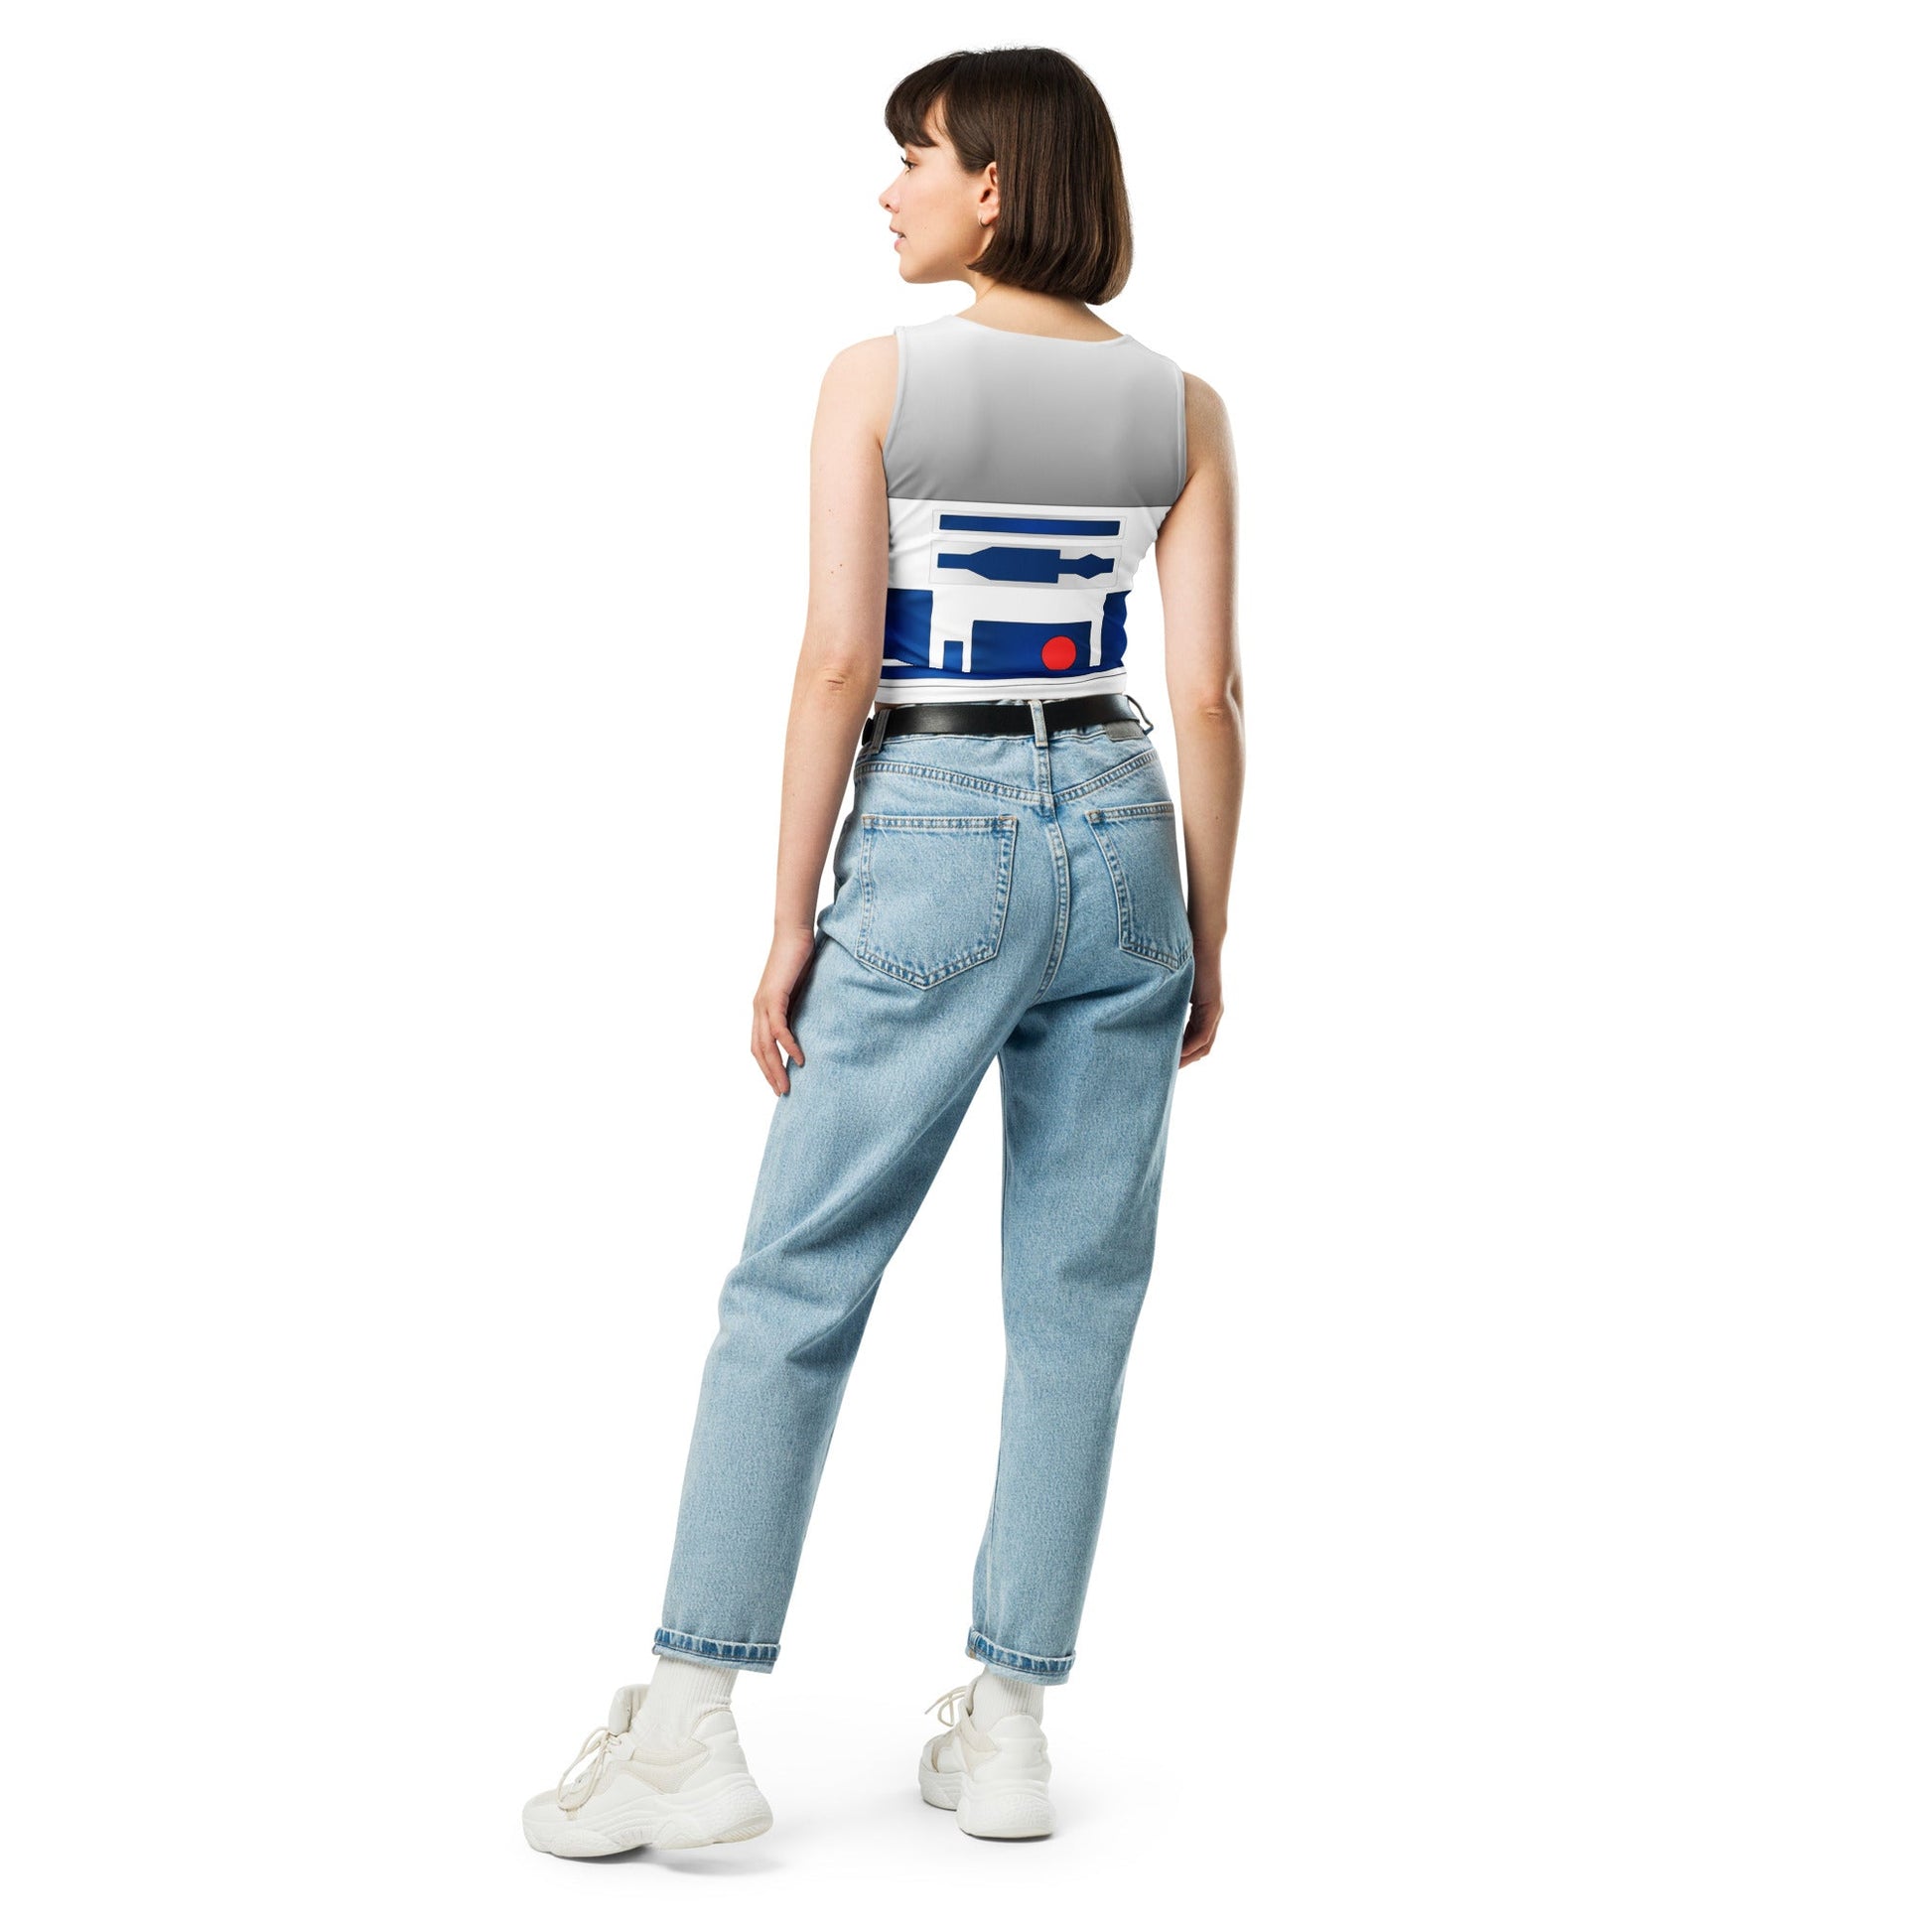 The Droid Crop Top adult cosplayadult r2d2 costumeWrong Lever Clothing